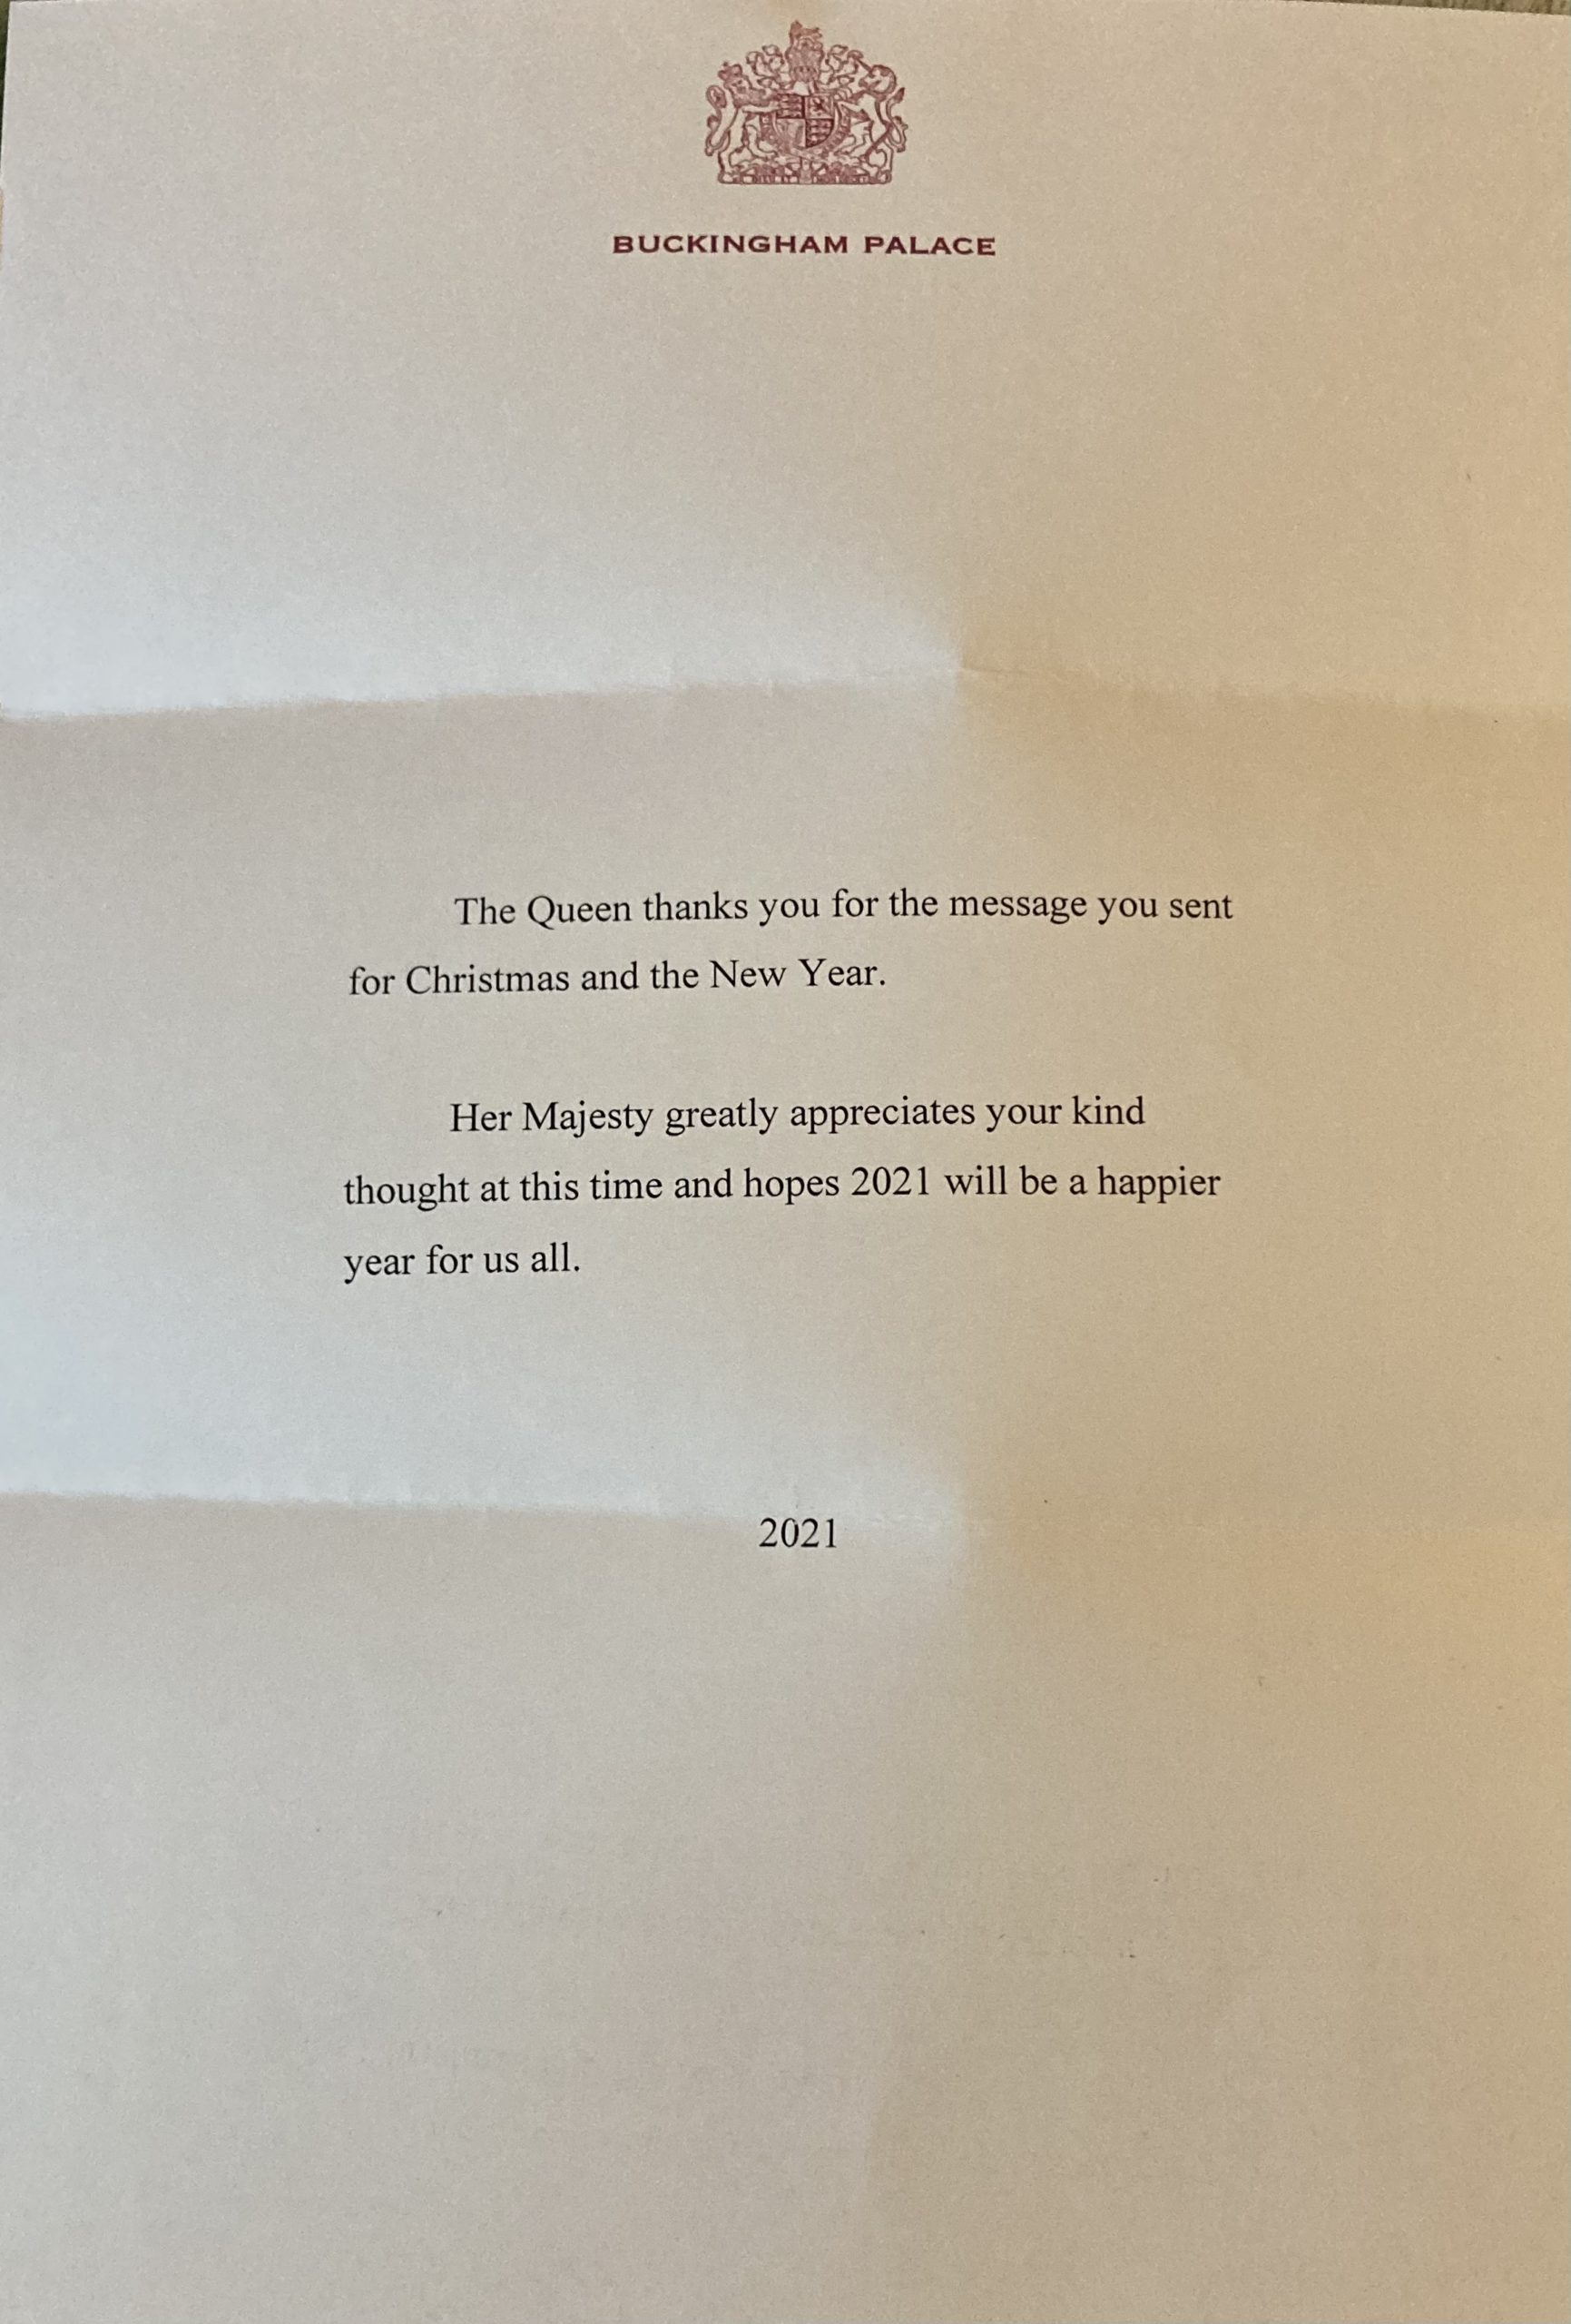 Her Majesty’s Christmas 2020 Reply